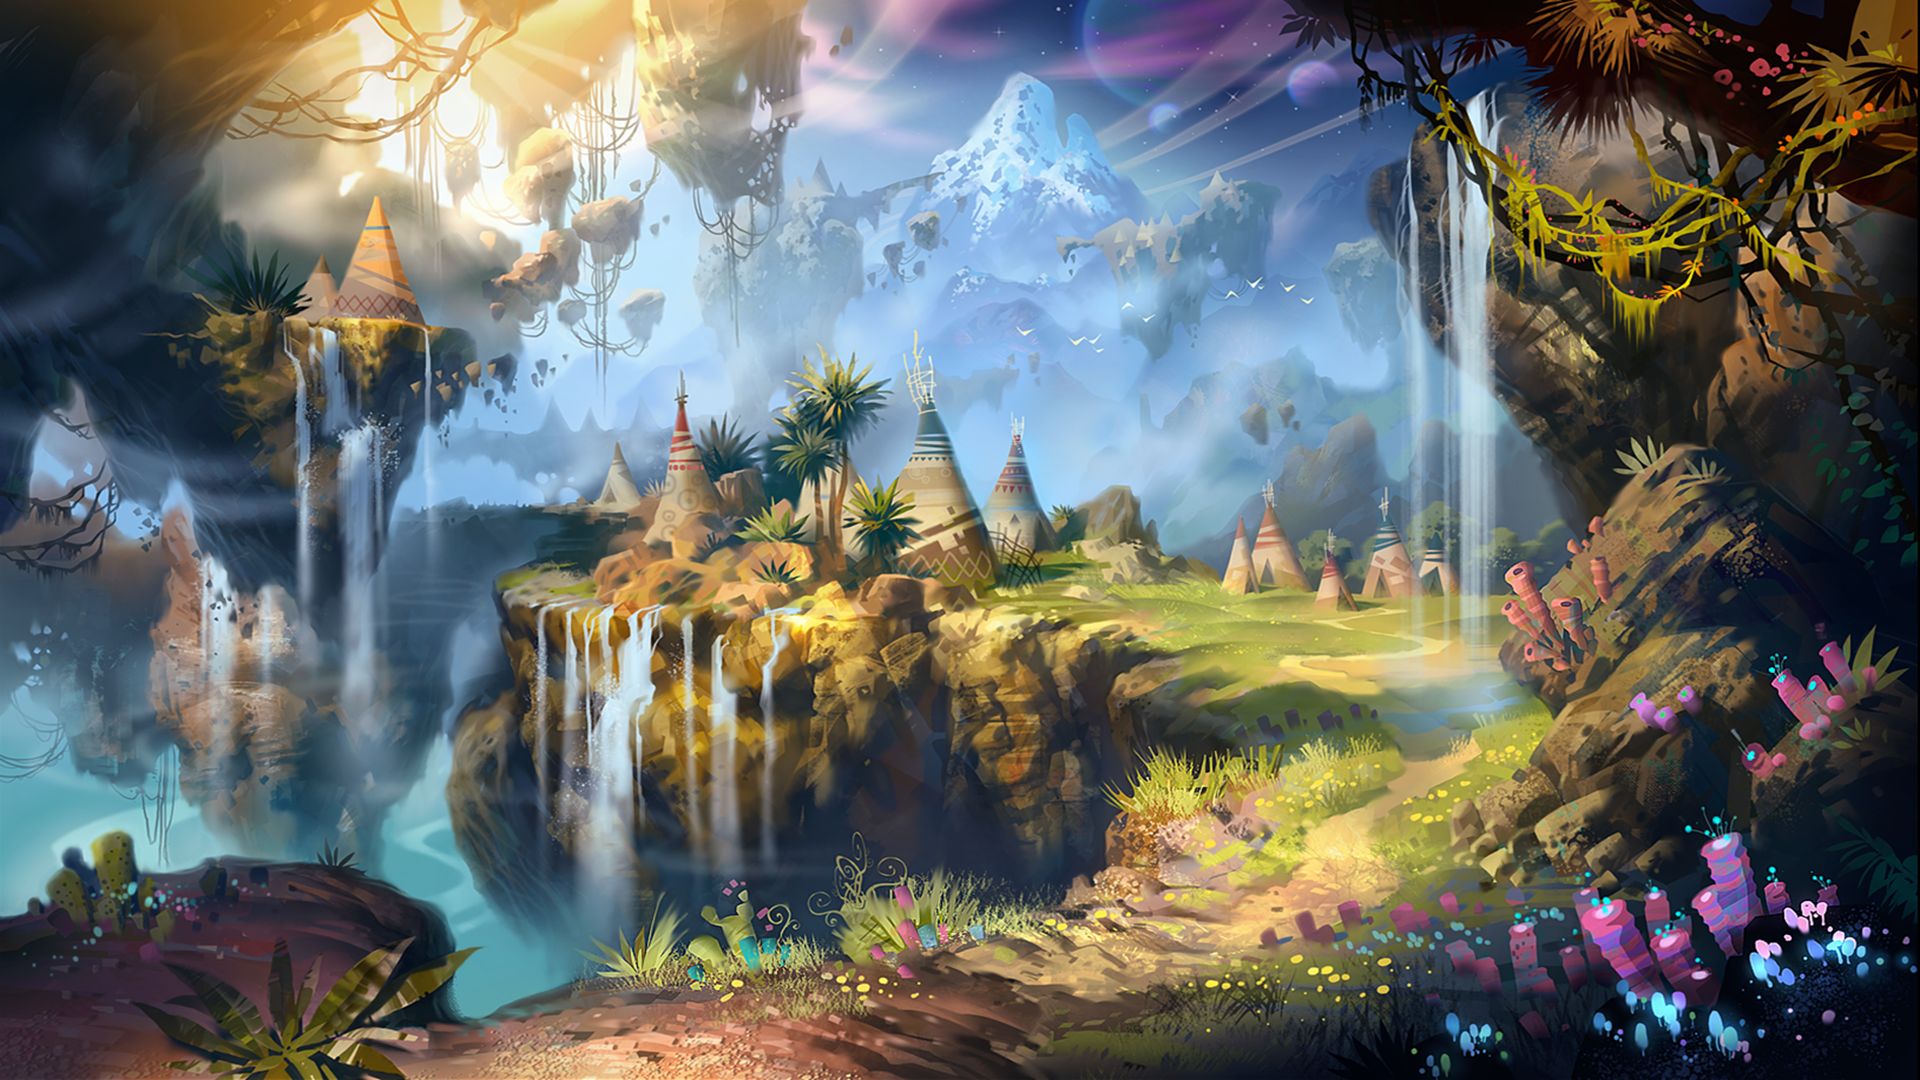 General 1920x1080 fantasy art waterfall mountains artwork colorful Tipi